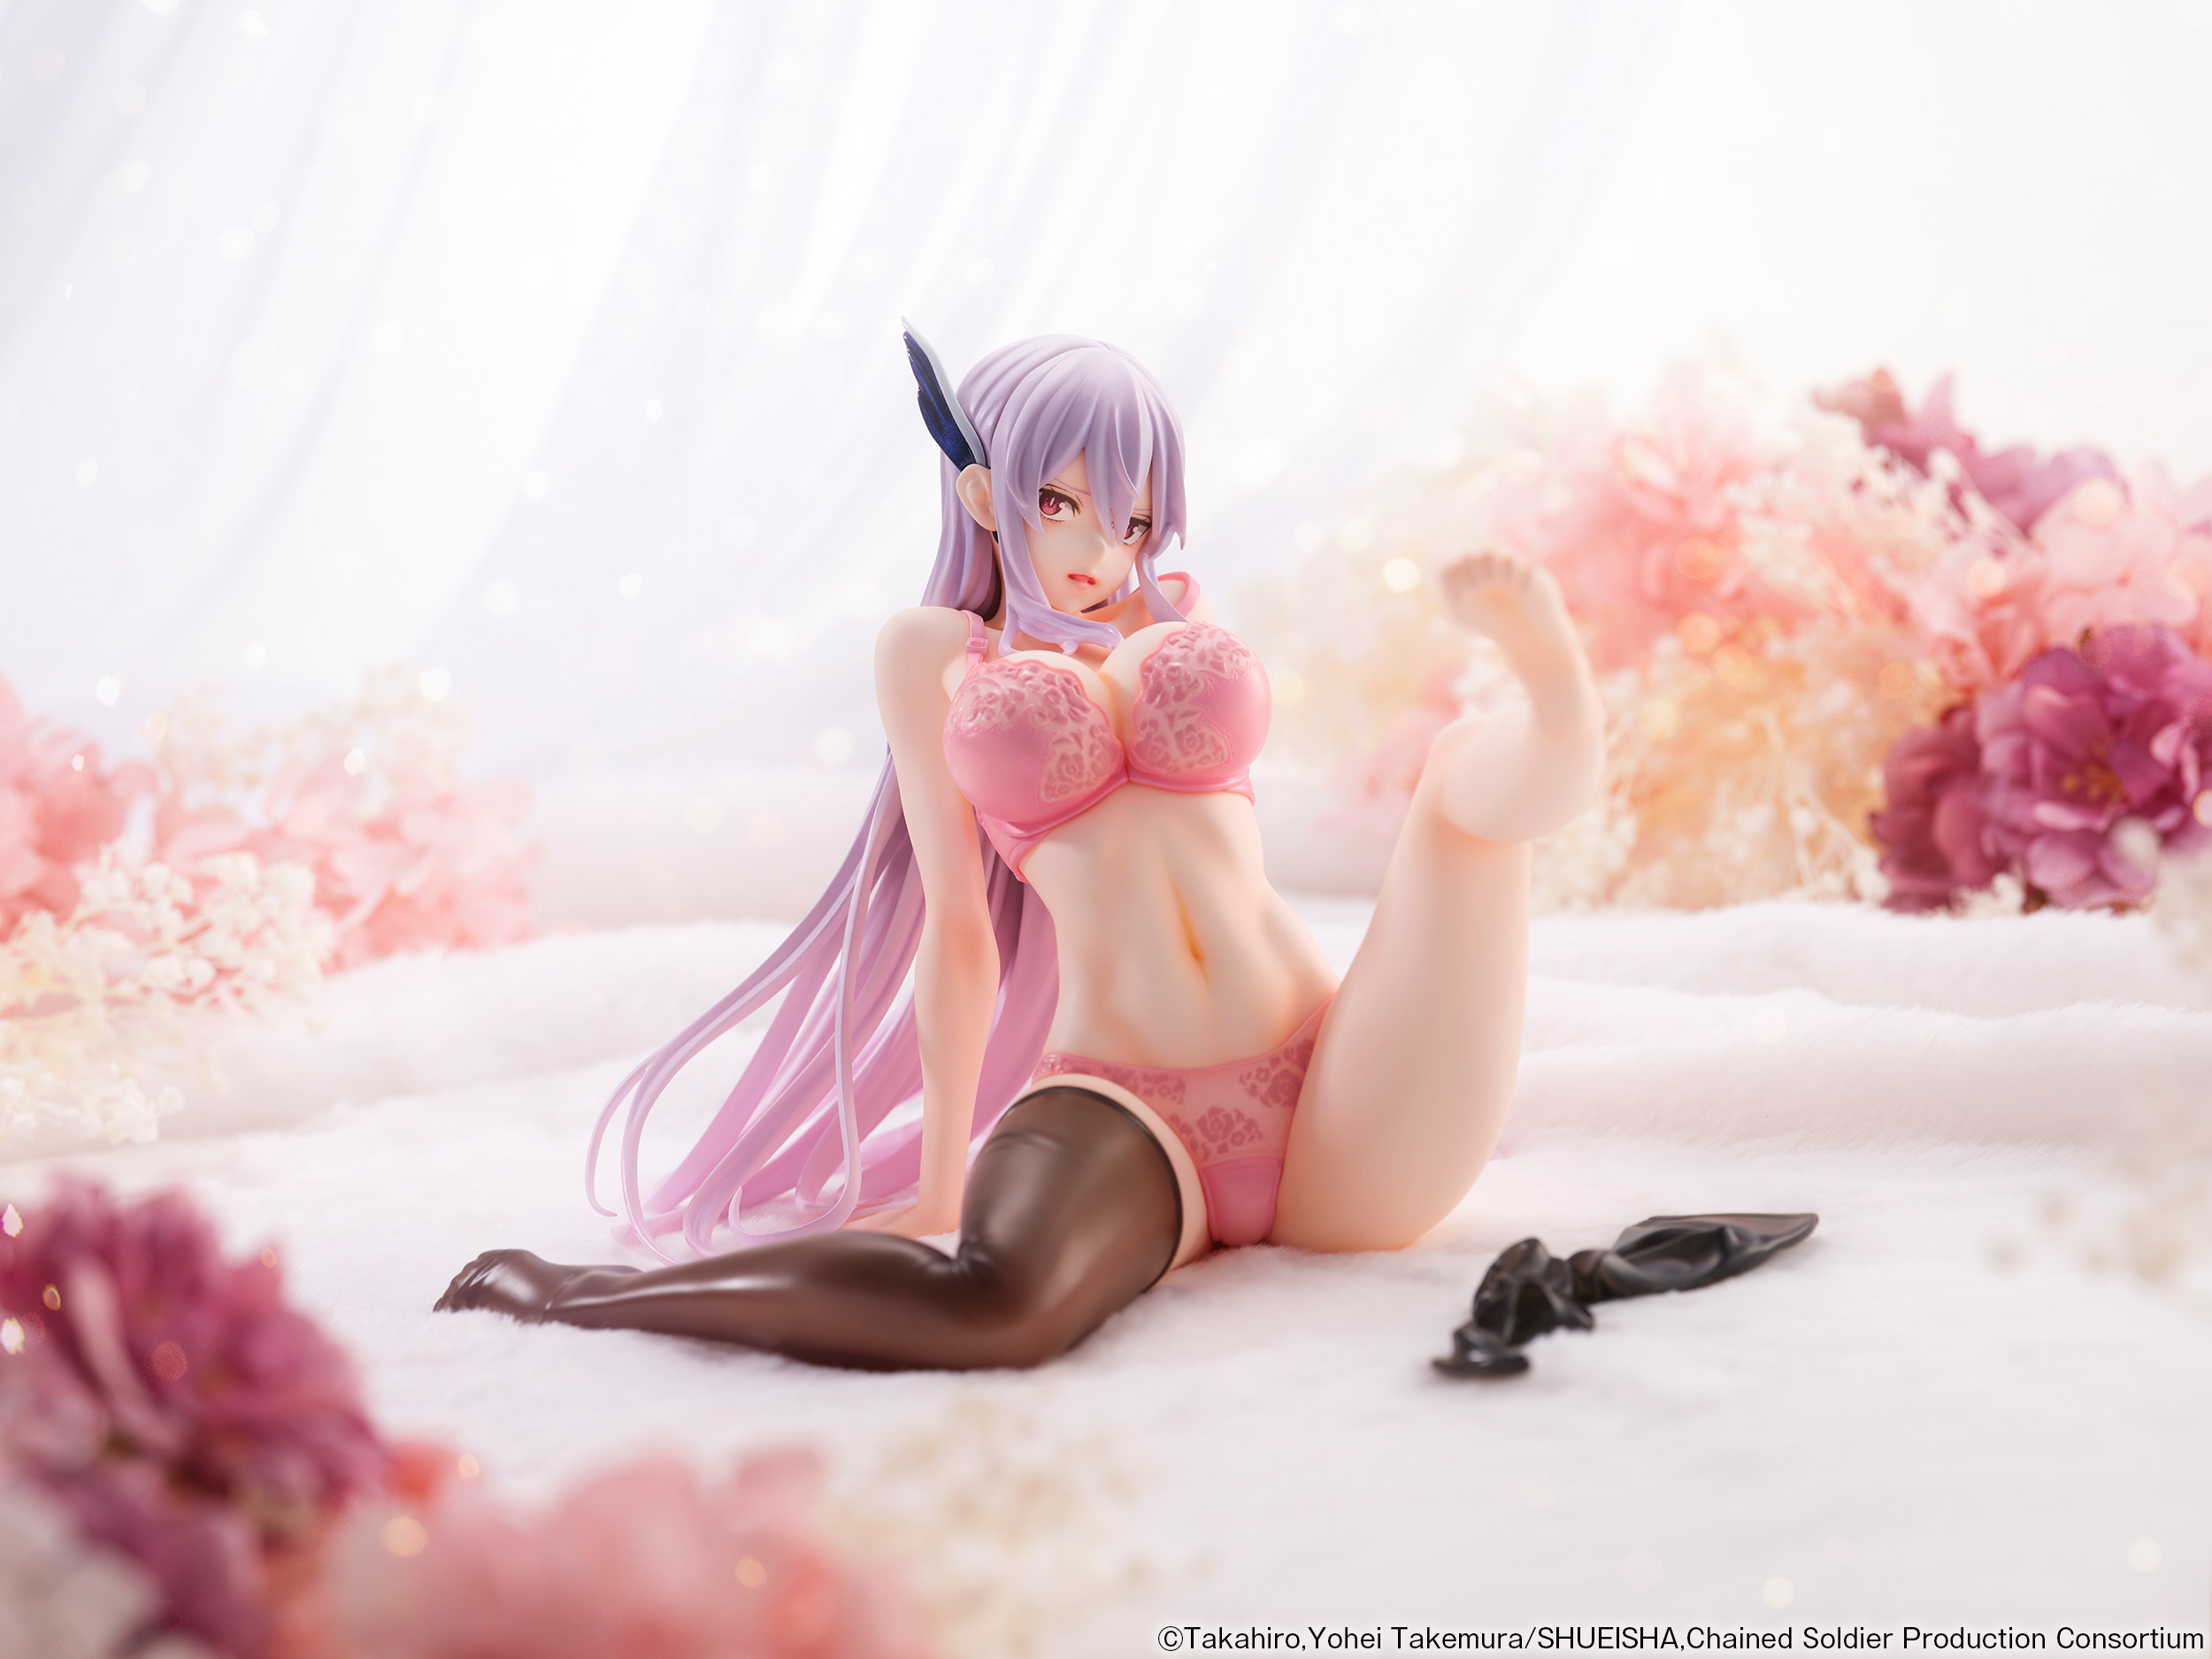 Recreated the Reward Scene! 1/7 scale figure “Kyouka Uzen Lingerie style” from TV Anime “Chained Soldier” Now Available for Order!